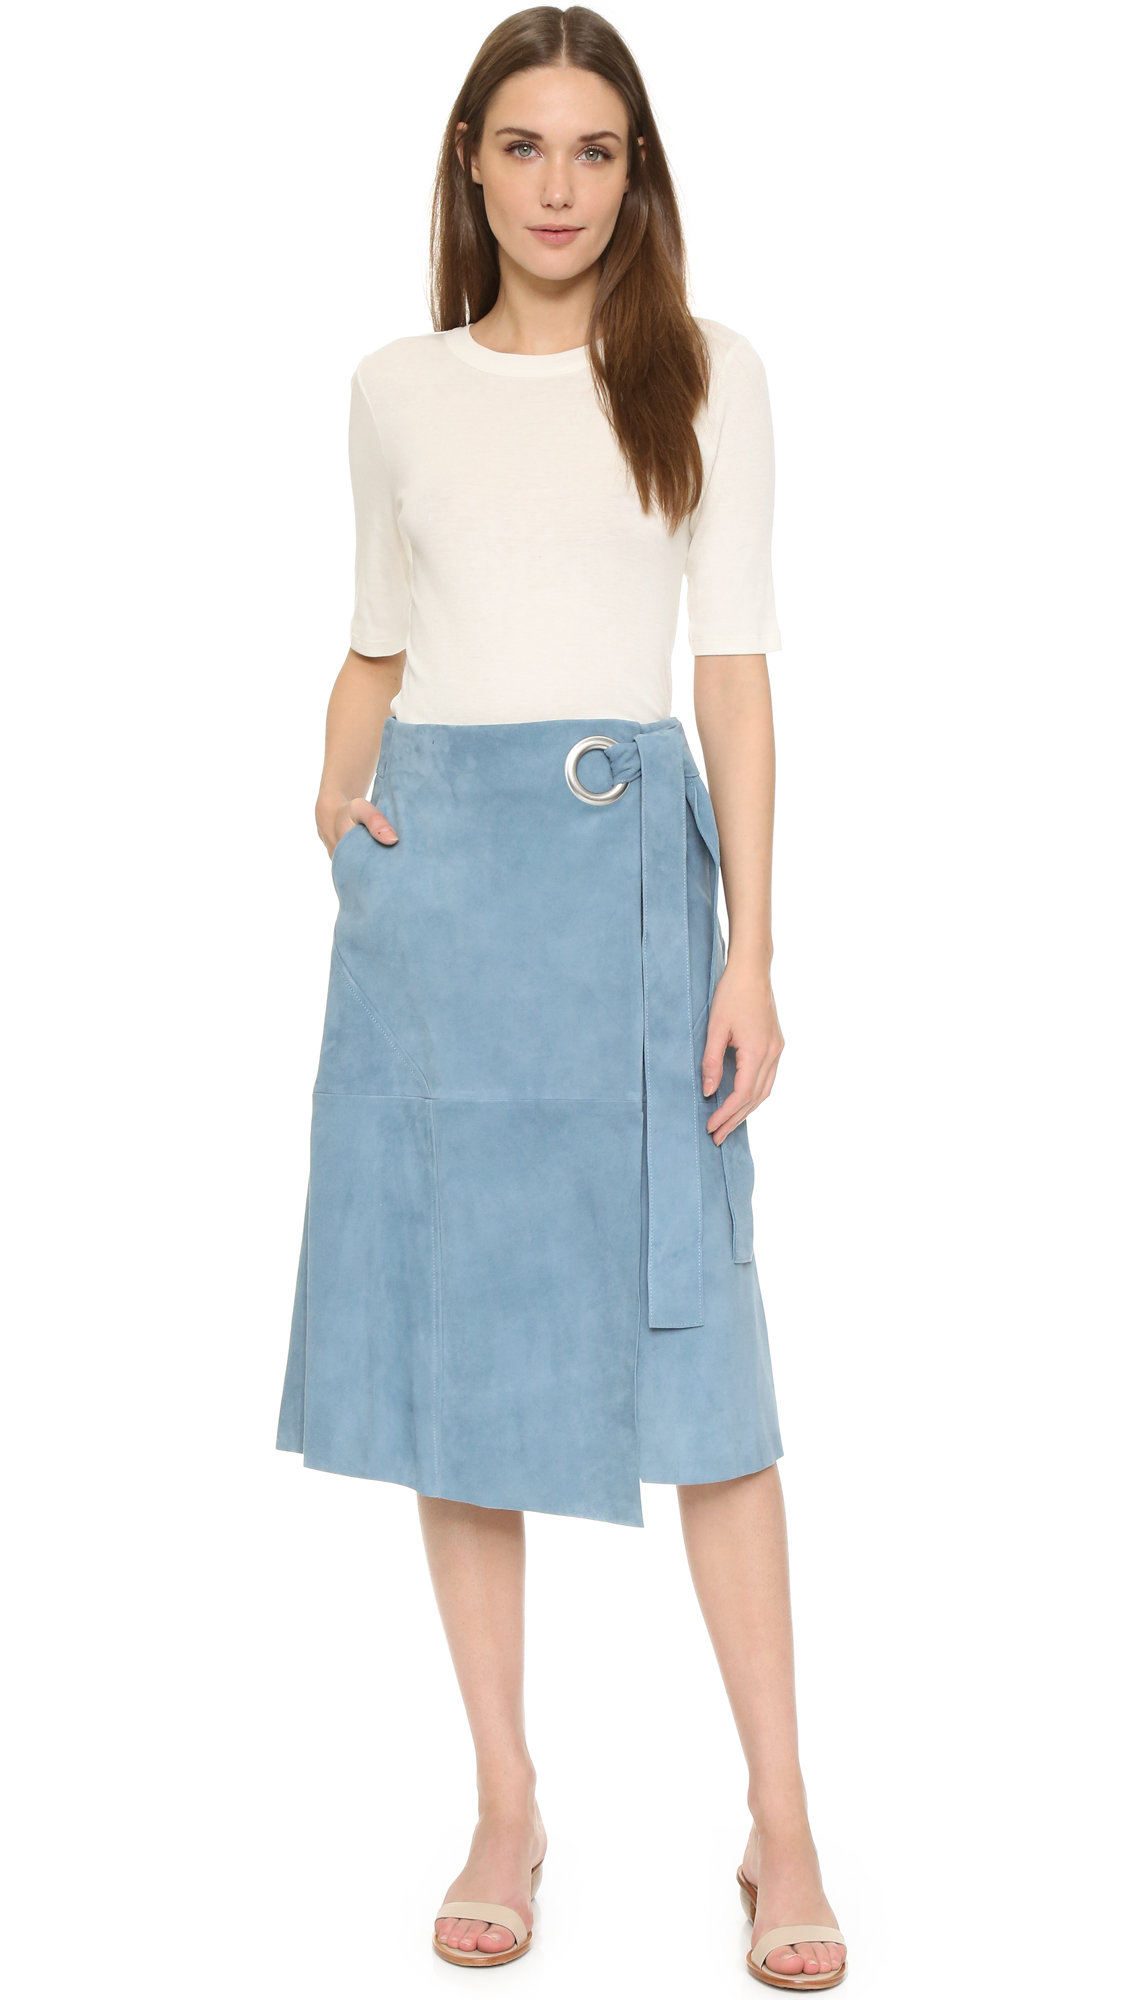 Lyst - Tibi Suede Wrap Skirt in Blue